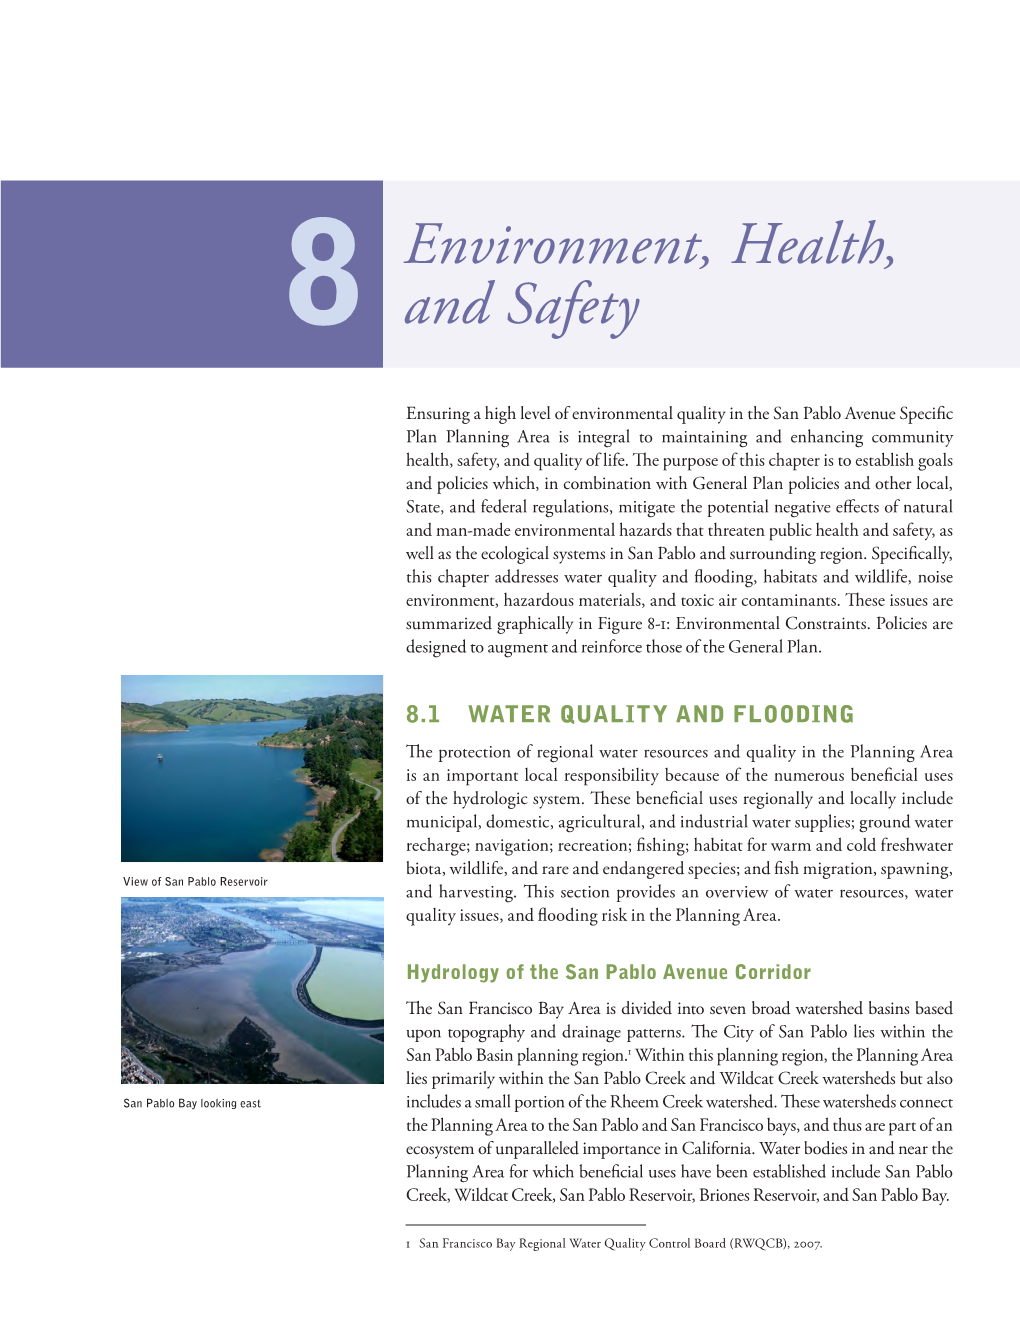 8 Environment, Health, and Safety